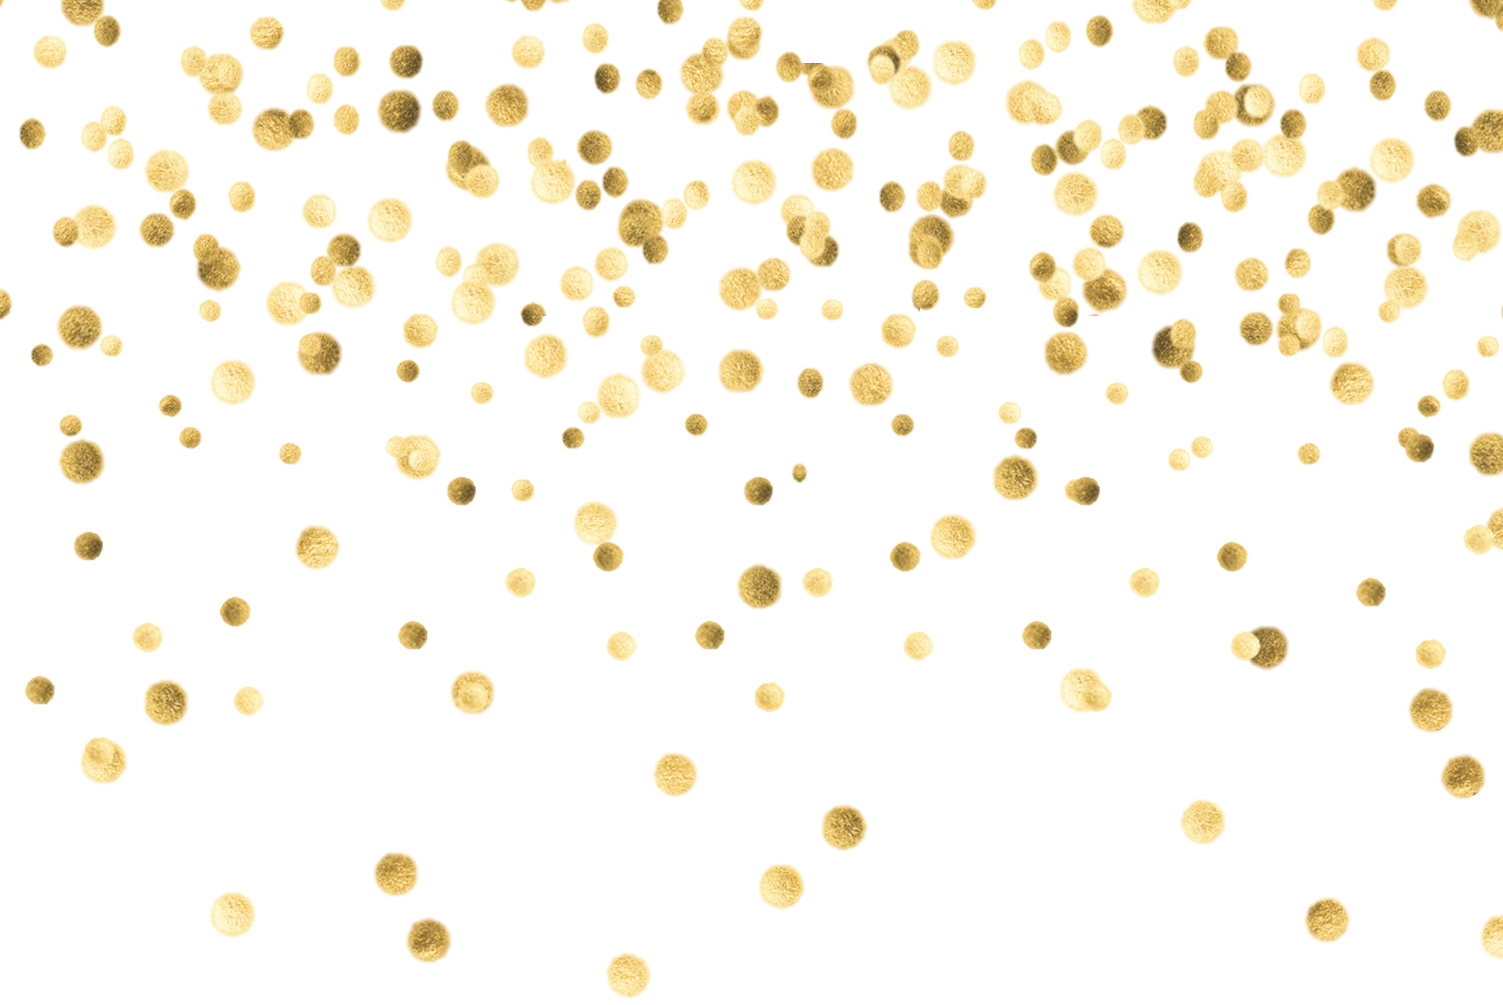 Transparent pictures free icons. Confetti border png